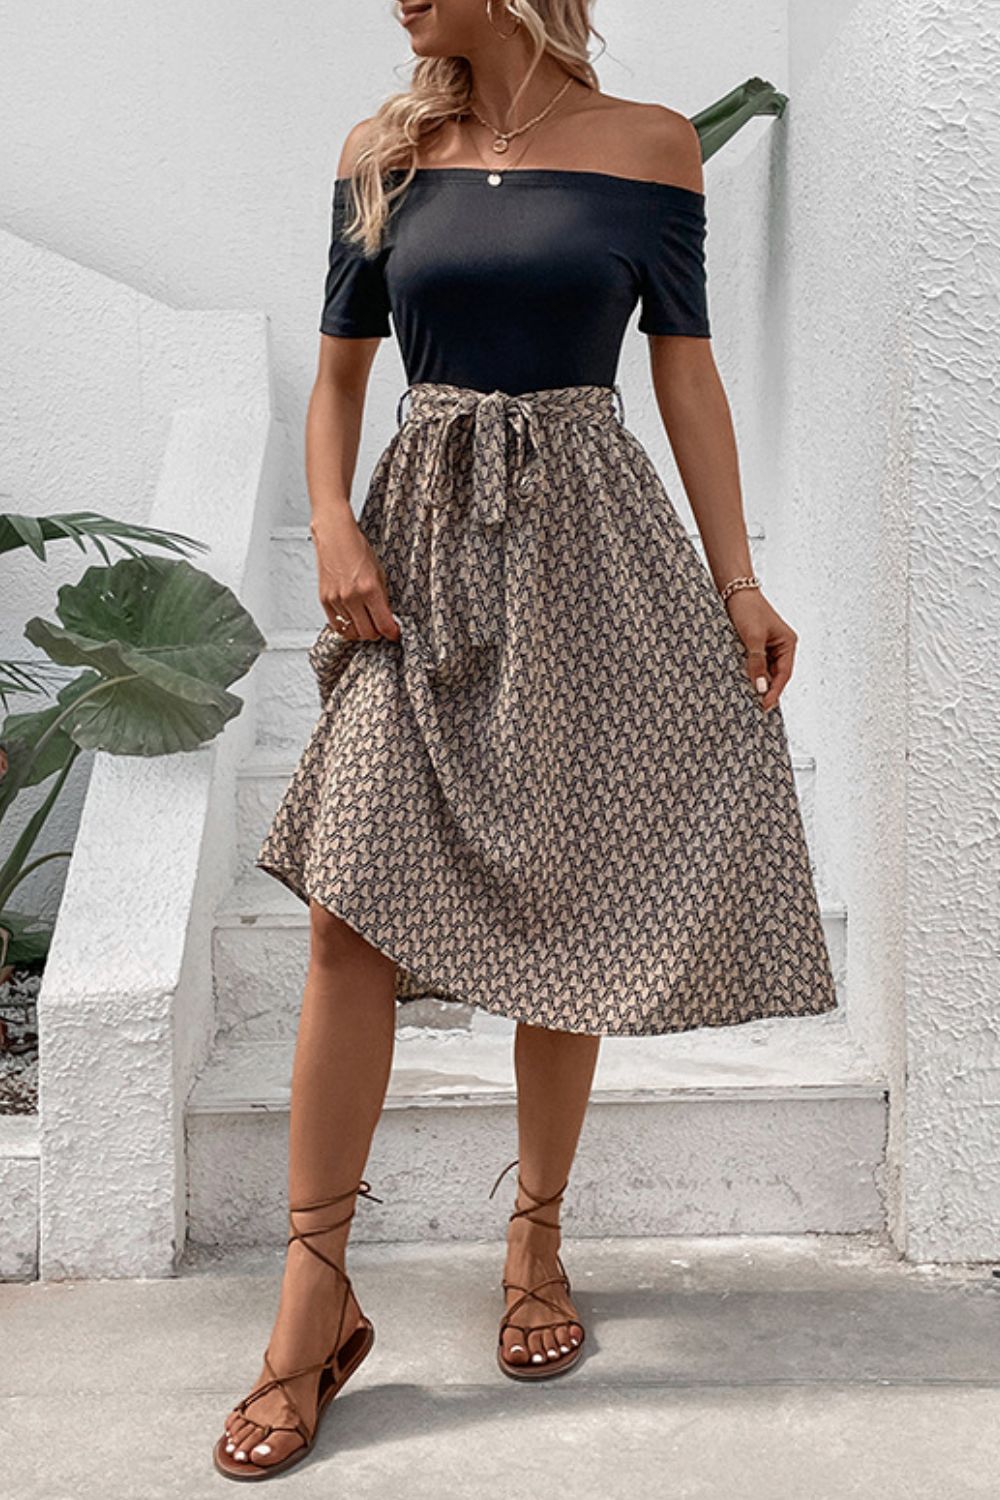 The image is showcasing a Printed Tie Belt Off - Shoulder Midi Dress Elegant Women Casual Party Formal Dress at Mommy & Lino's Closet